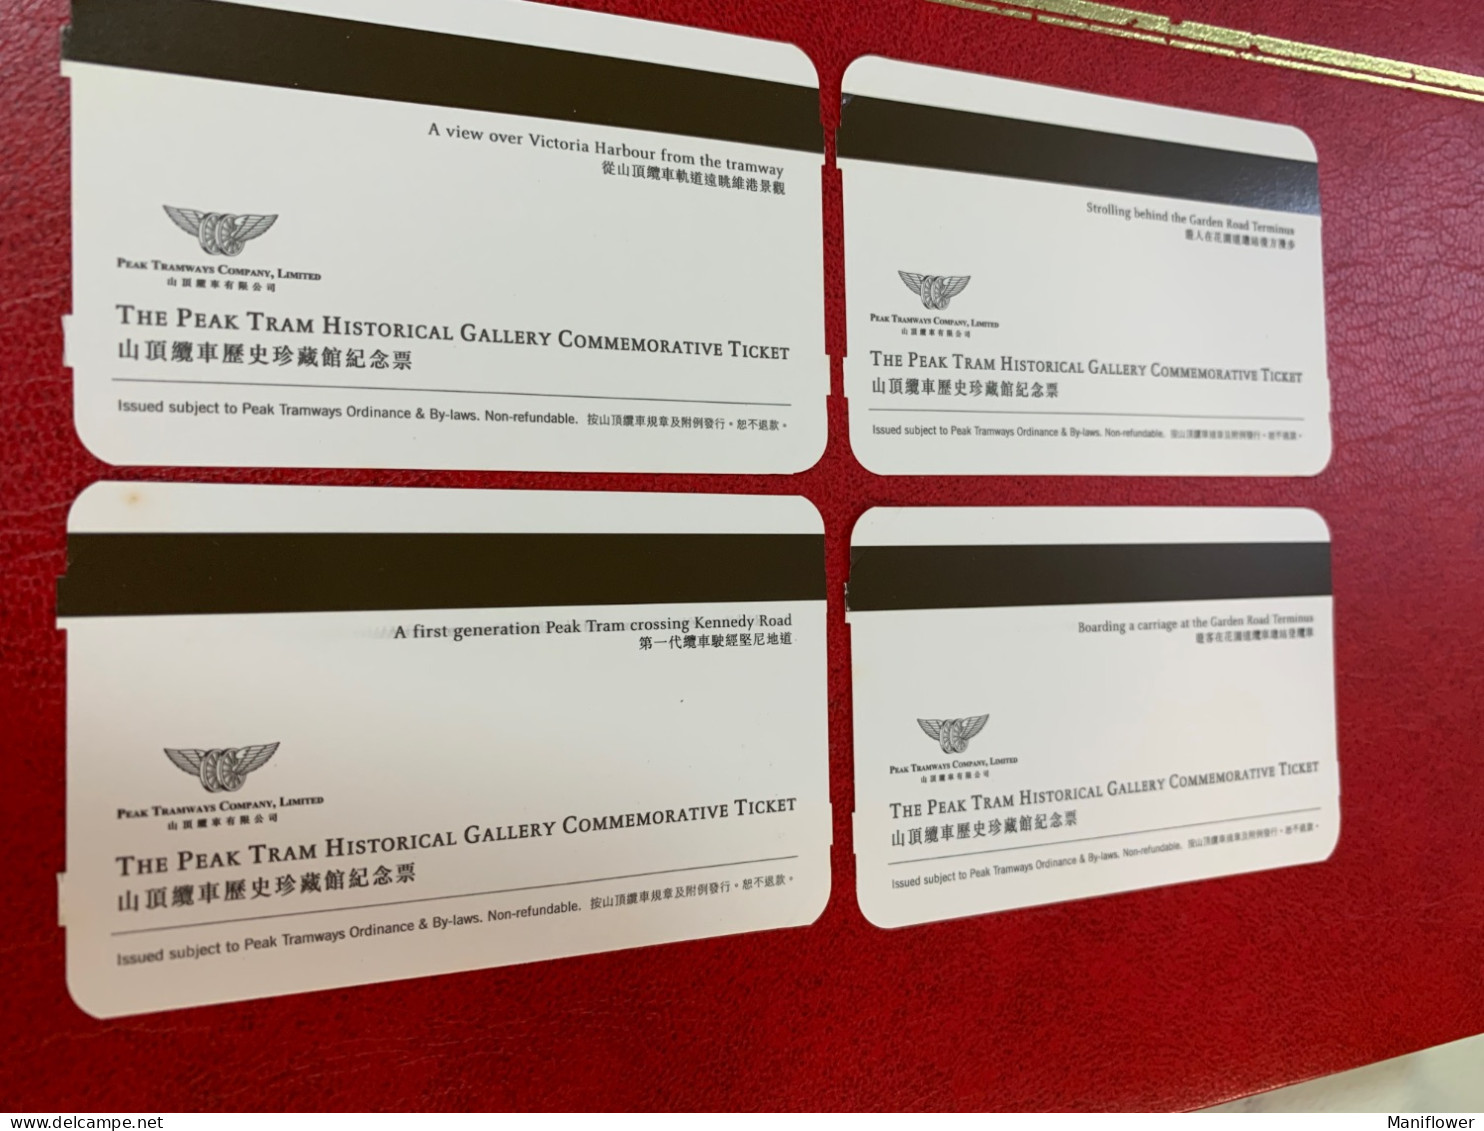 Hong Kong Tramway Cards X 4 Locomotive - Covers & Documents